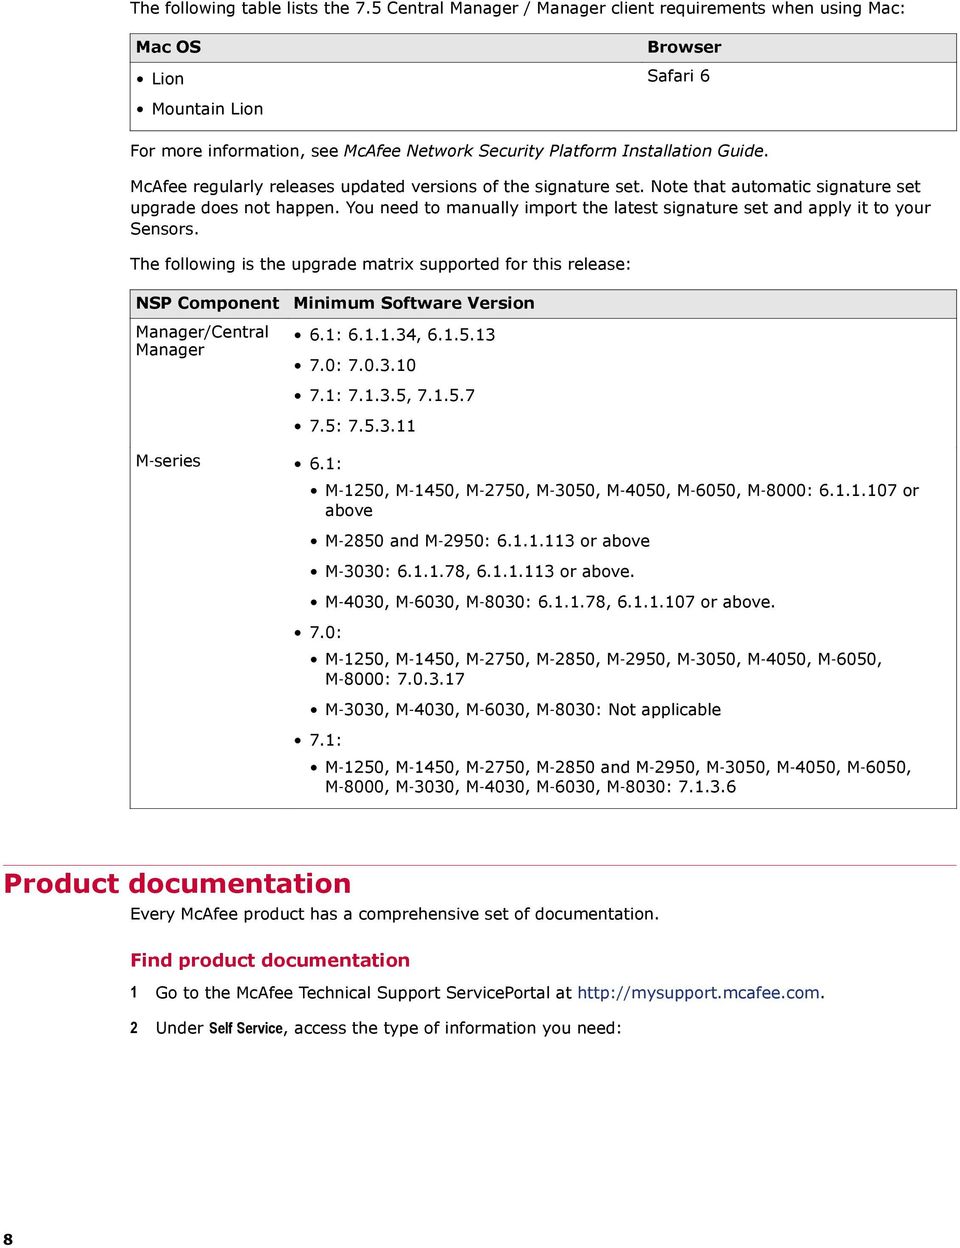 McAfee regularly releases updated versions of the signature set. Note that automatic signature set upgrade does not happen.